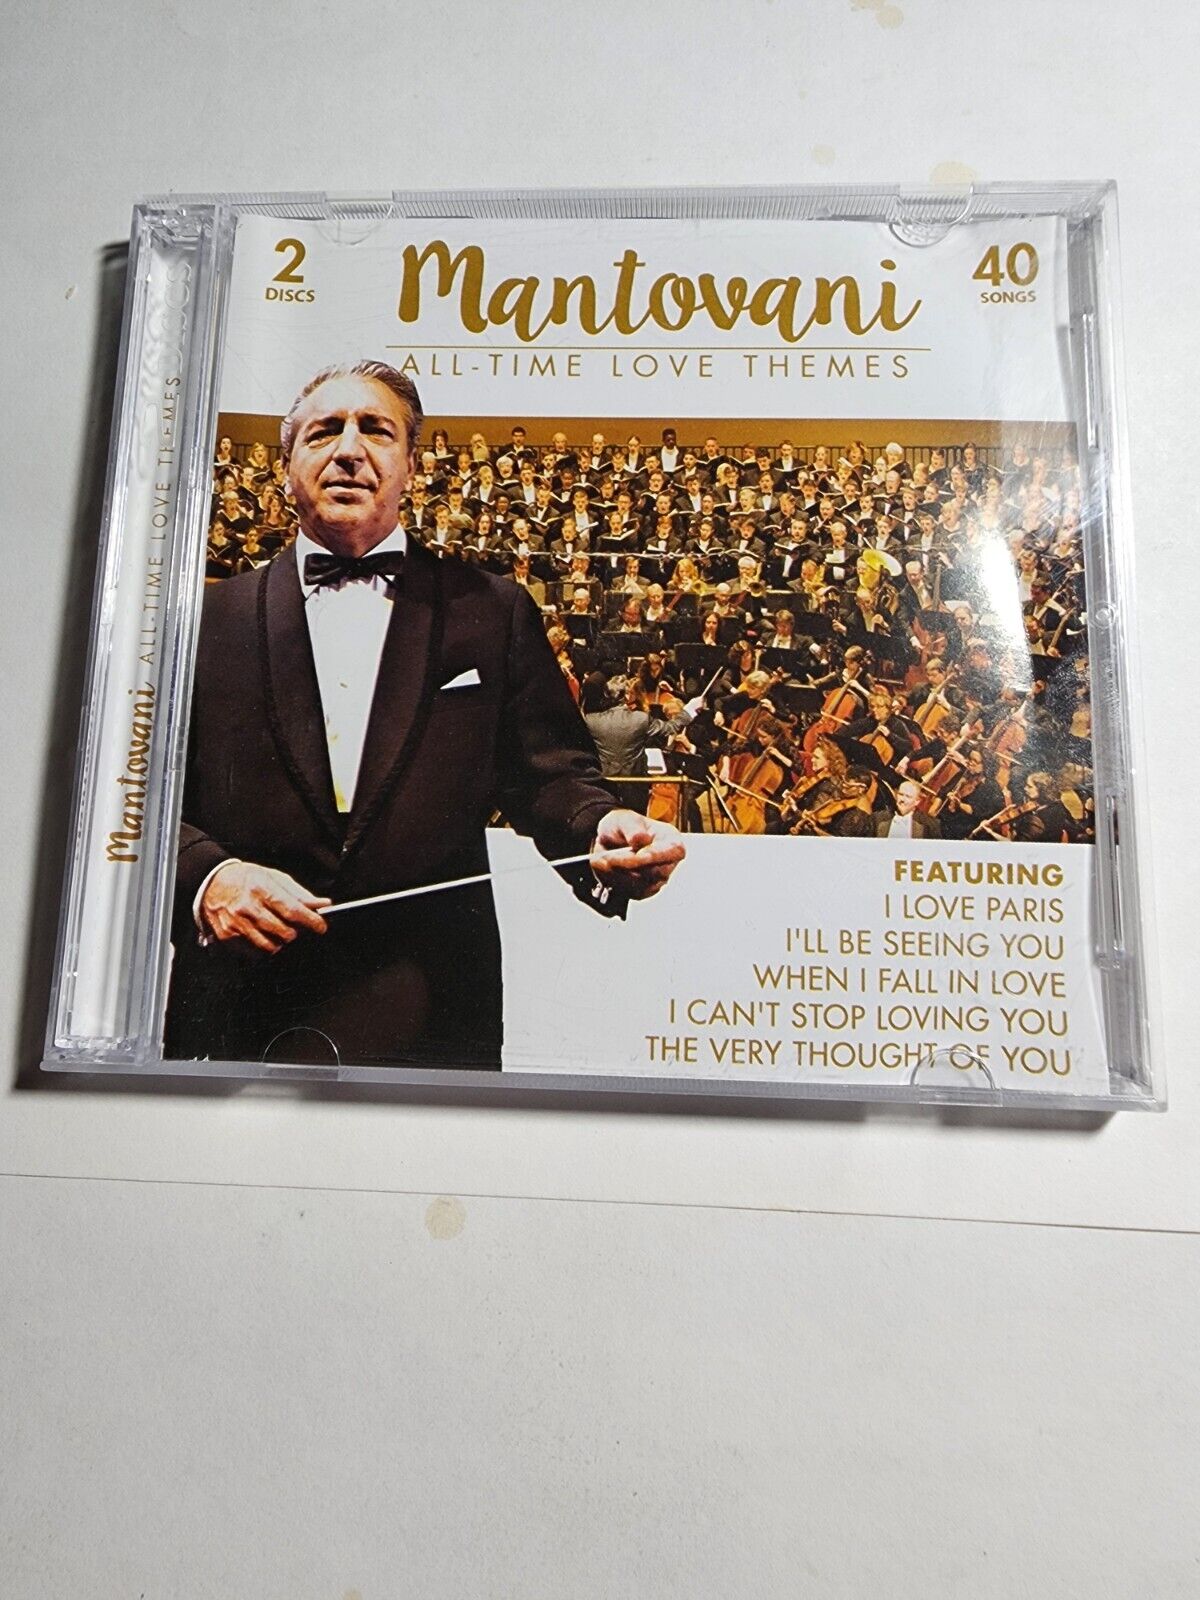 Mantovani All Time Love Themes 2-Disc 40 songs VG+ CD44